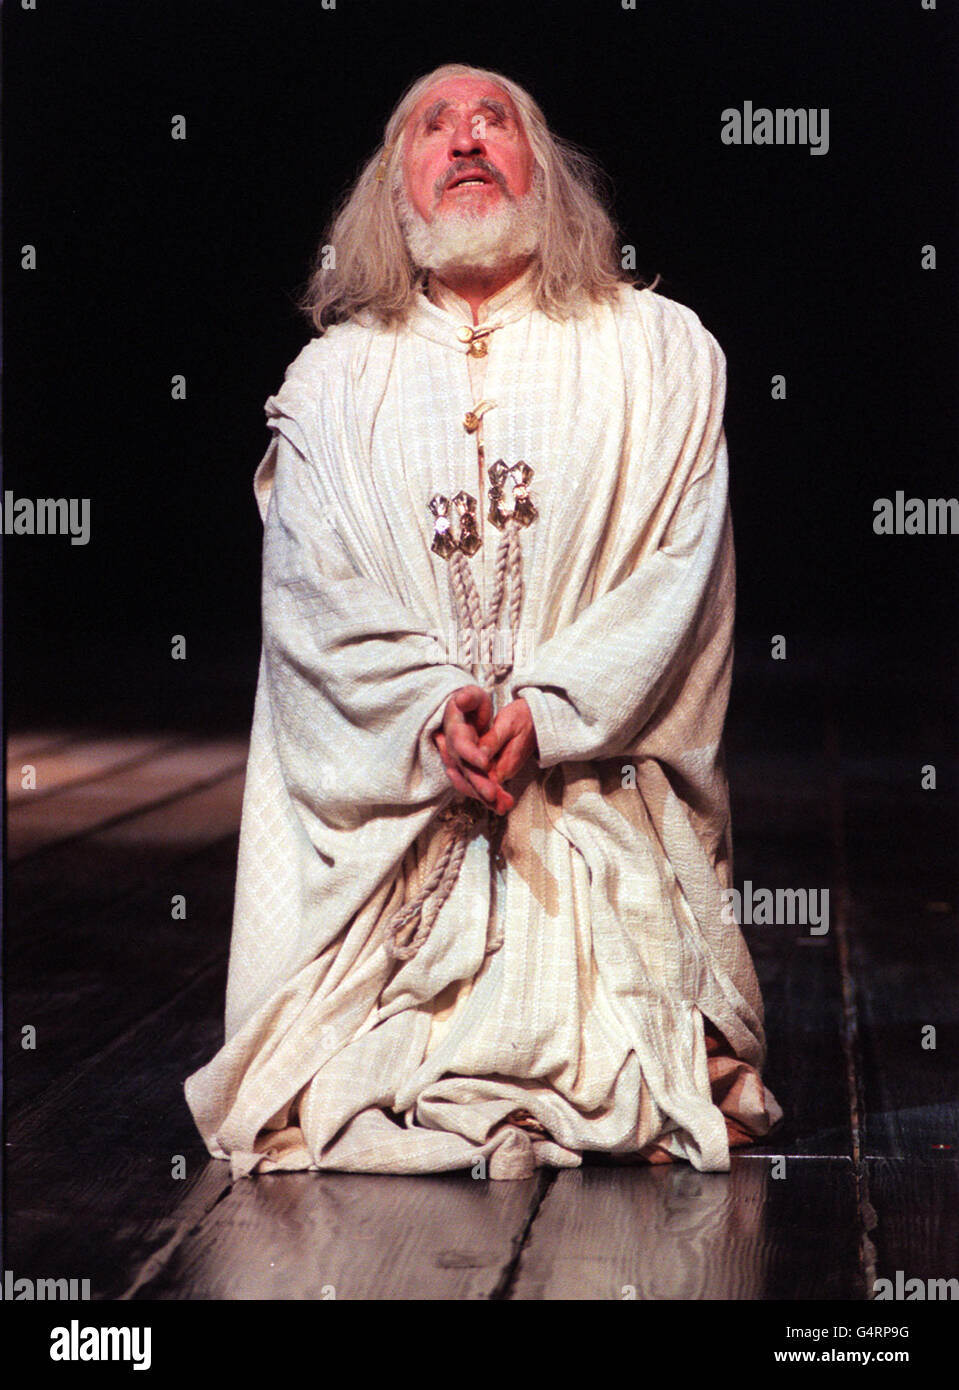 Nigel Hawthorne in the role of King Lear during rehearsals at the London Barbican Theatre and performed by members of the Royal Shakespeare Company. Stock Photo